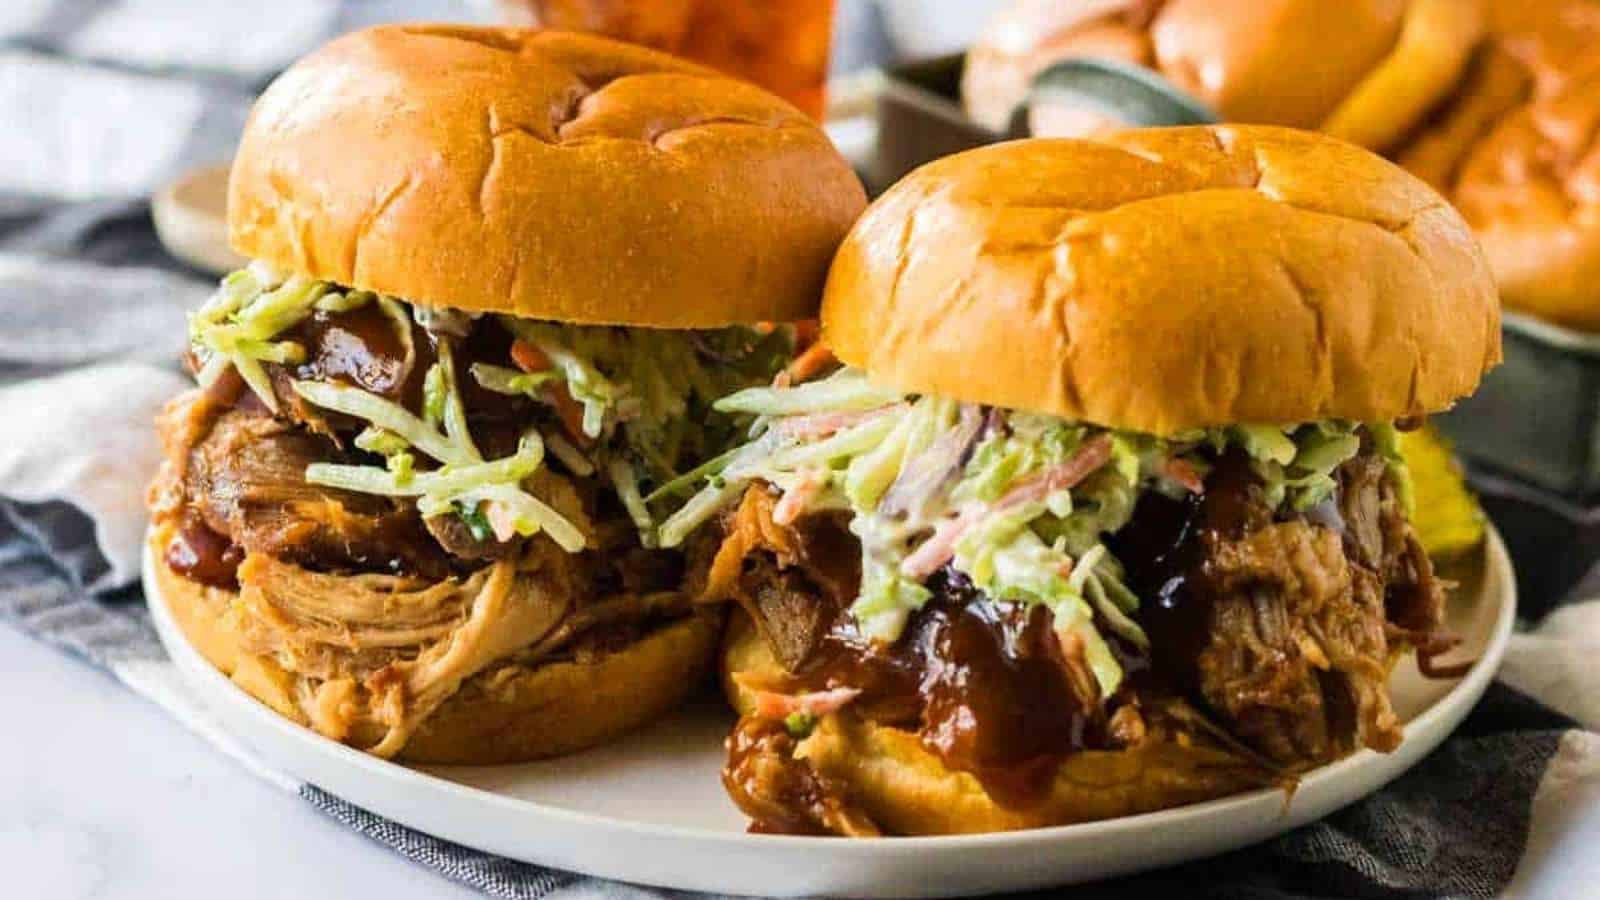 Two pulled pork sliders on a plate with coleslaw.